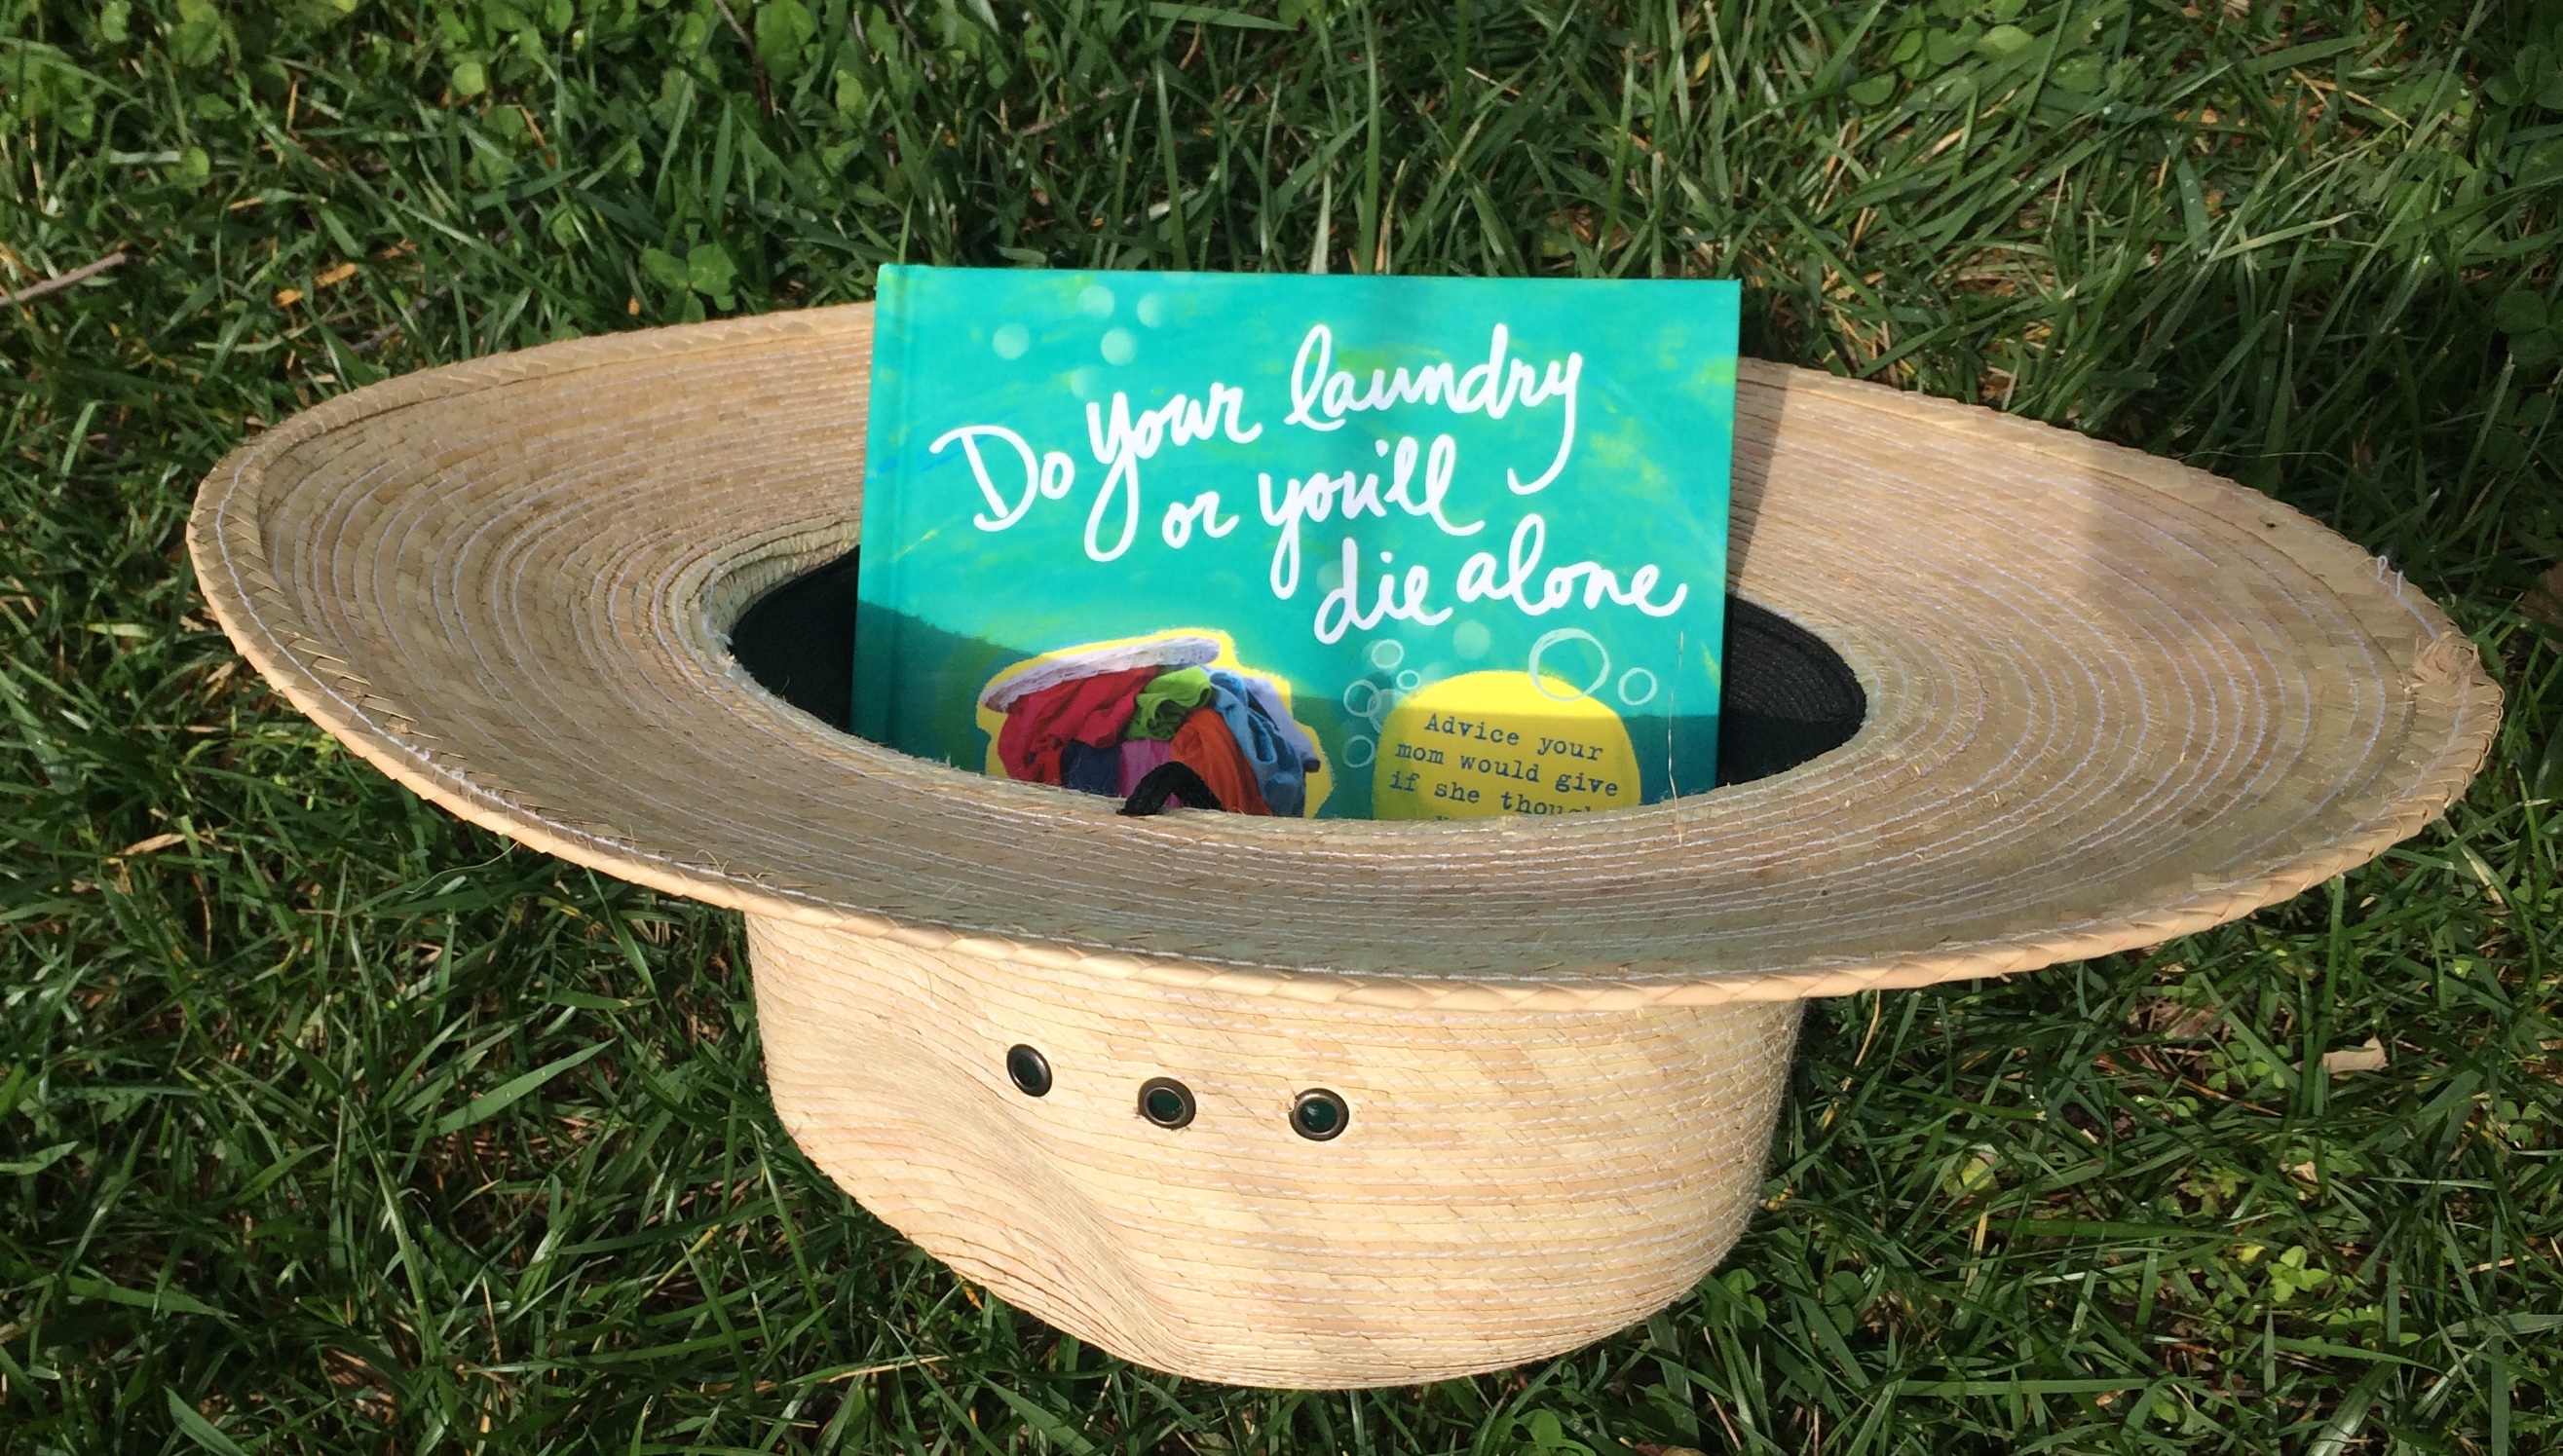 do your laundry or you'll die alone book in straw hat on grass